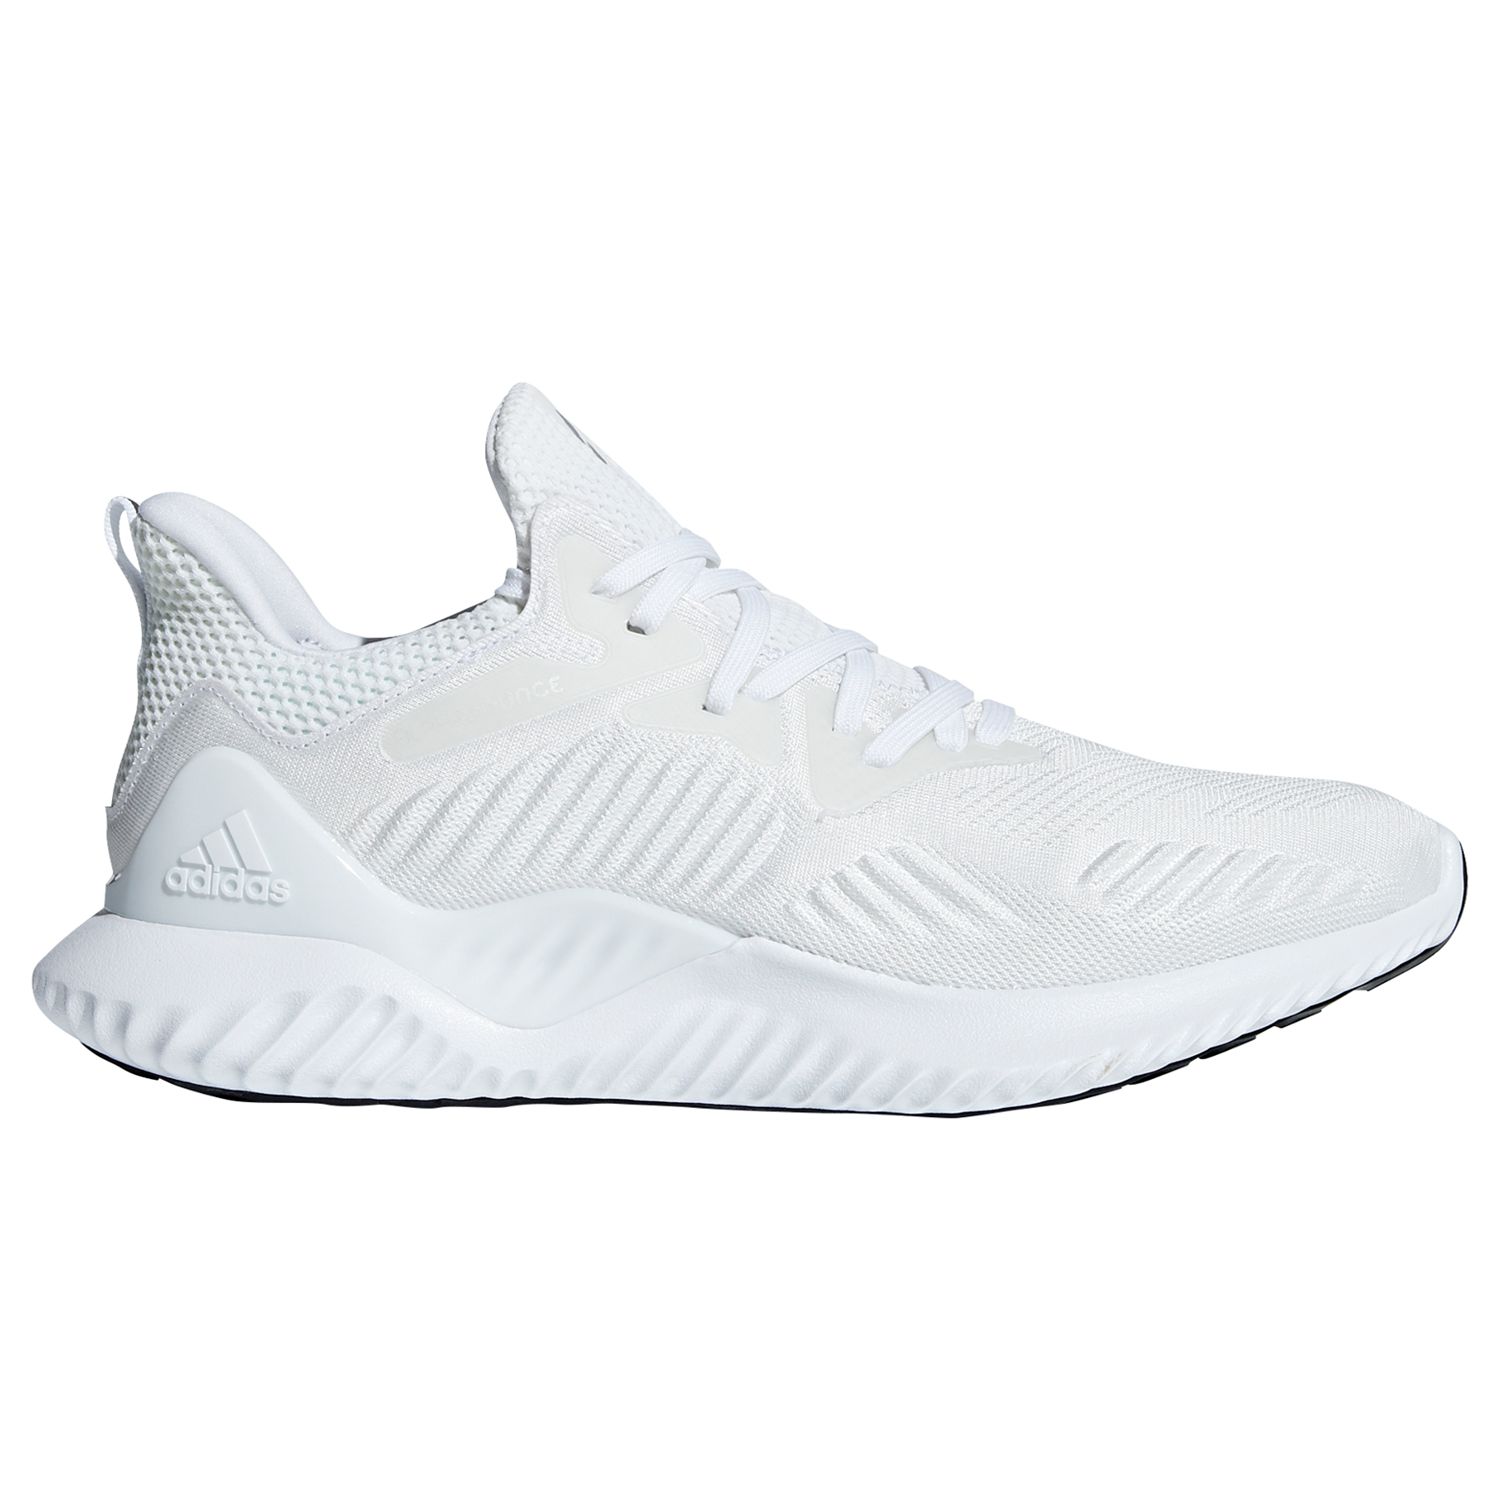 adidas alphabounce shoes white